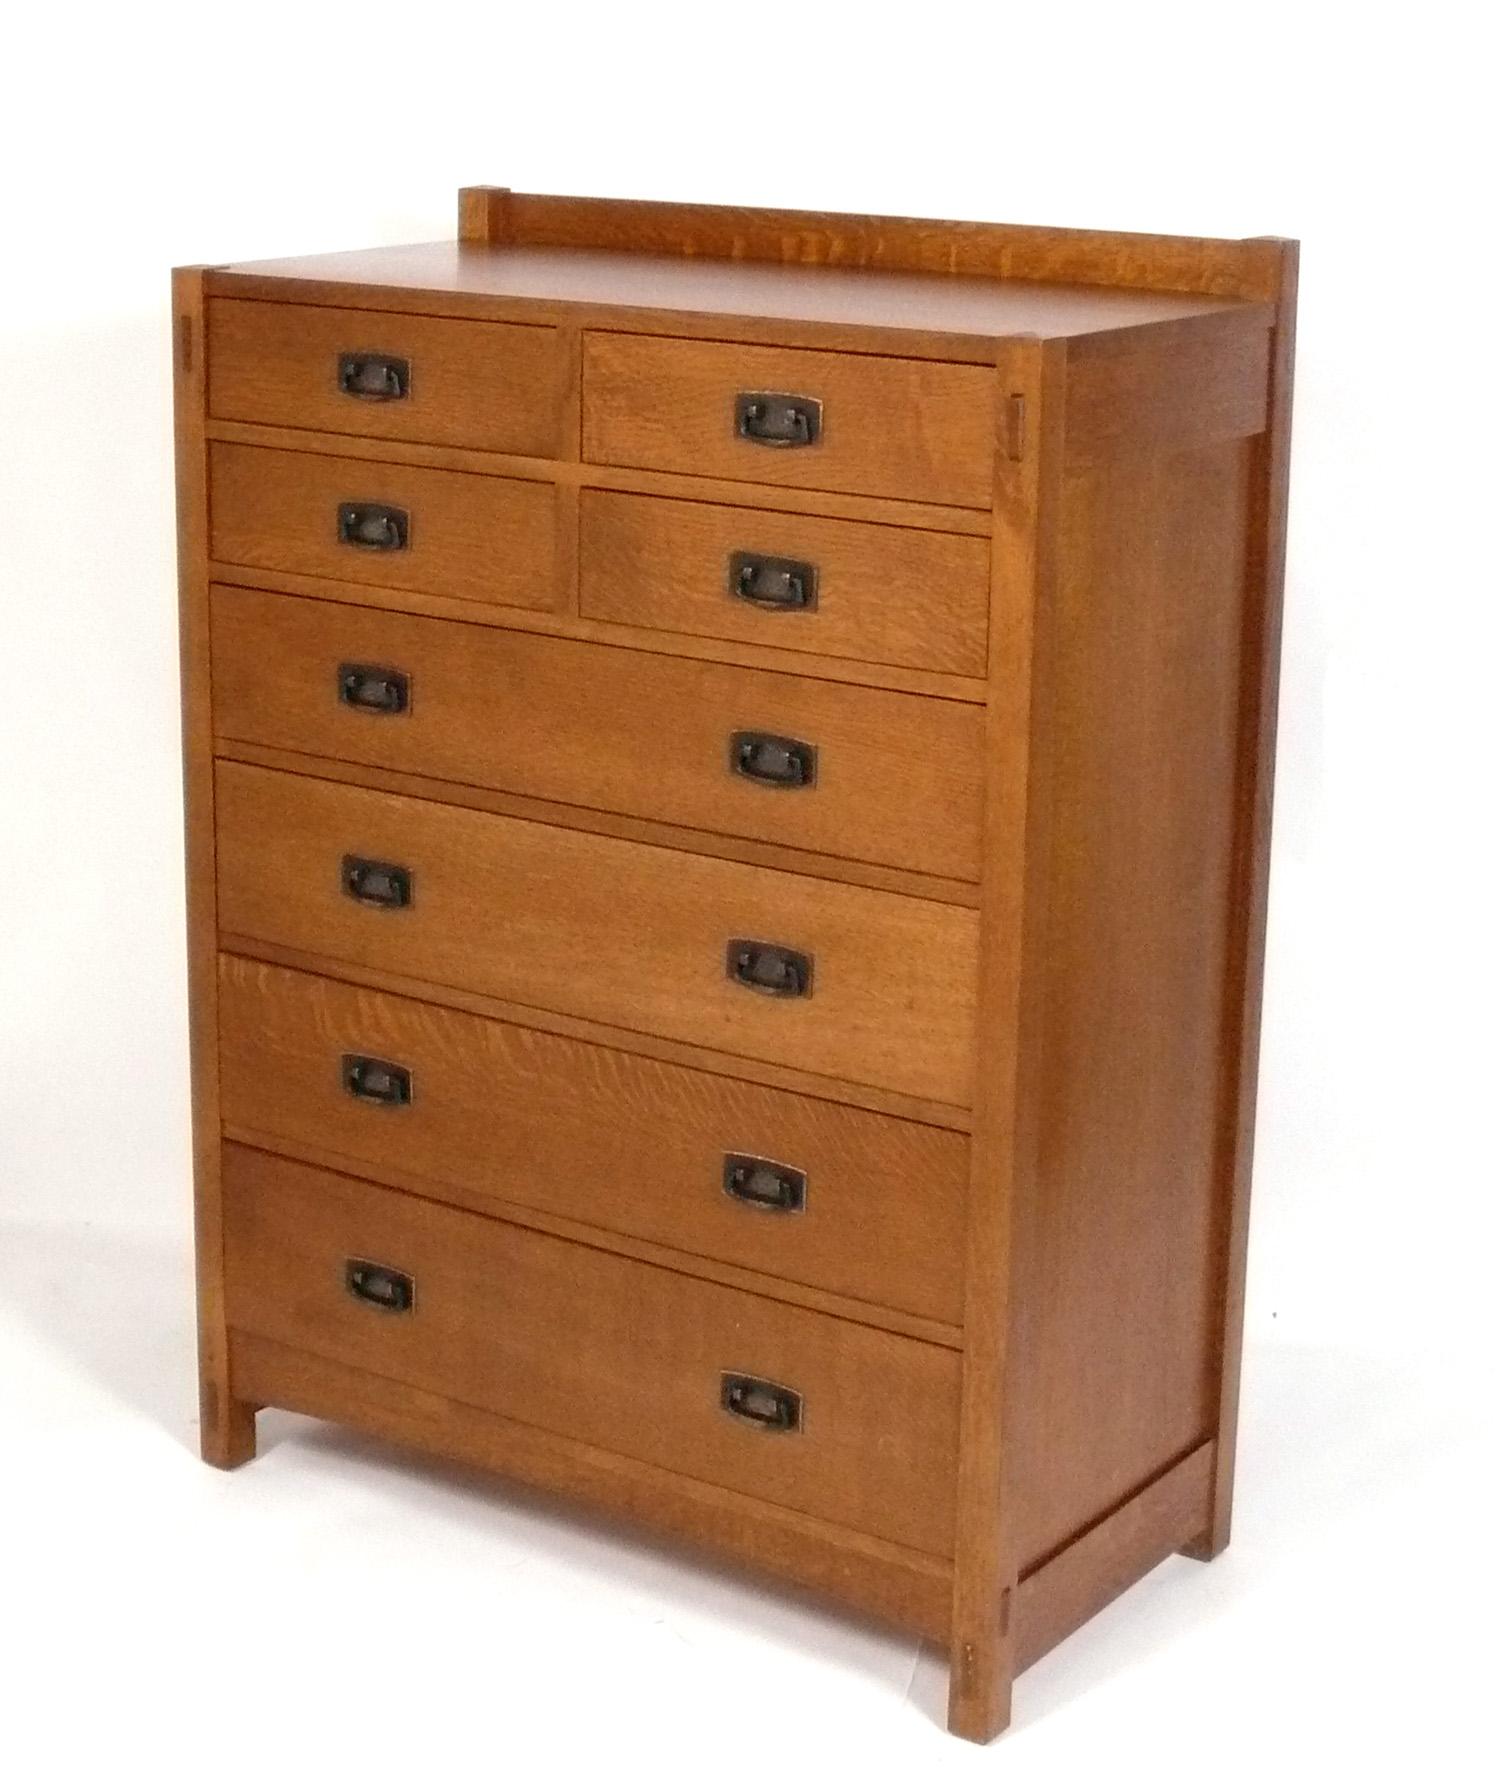 Clean Lined Stickley Tall Chest or Dresser, originally designed in the 1910s by Gustav Stickley, this example is part of the authorized line produced by Stickley in the 2000s. Like all Stickley furniture, this piece is extremely well made with